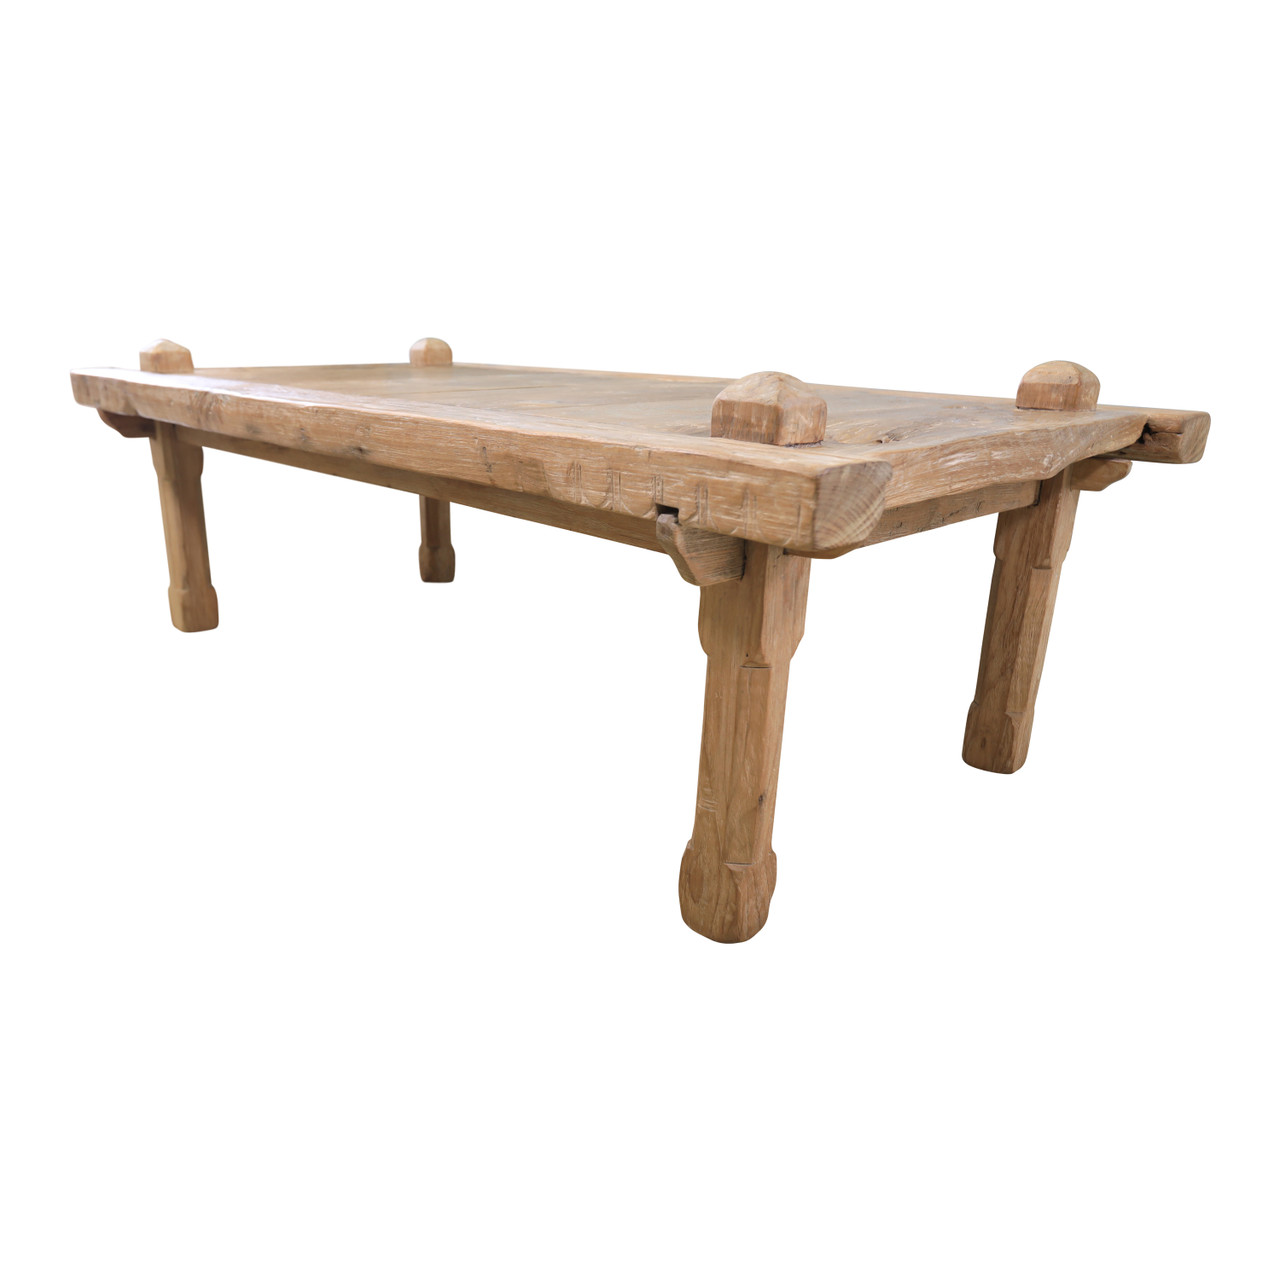 20 Inch Wide Table